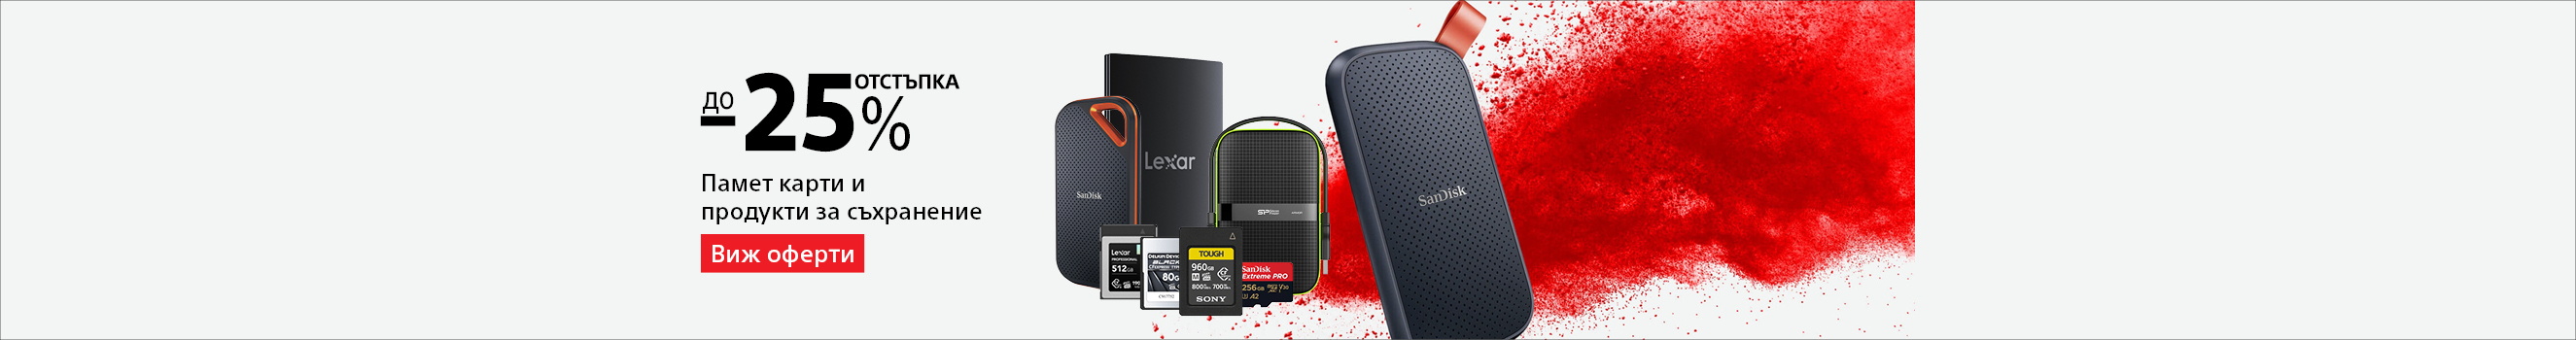  Get up to 25% off storage products: memory cards and external drives until 07.07.